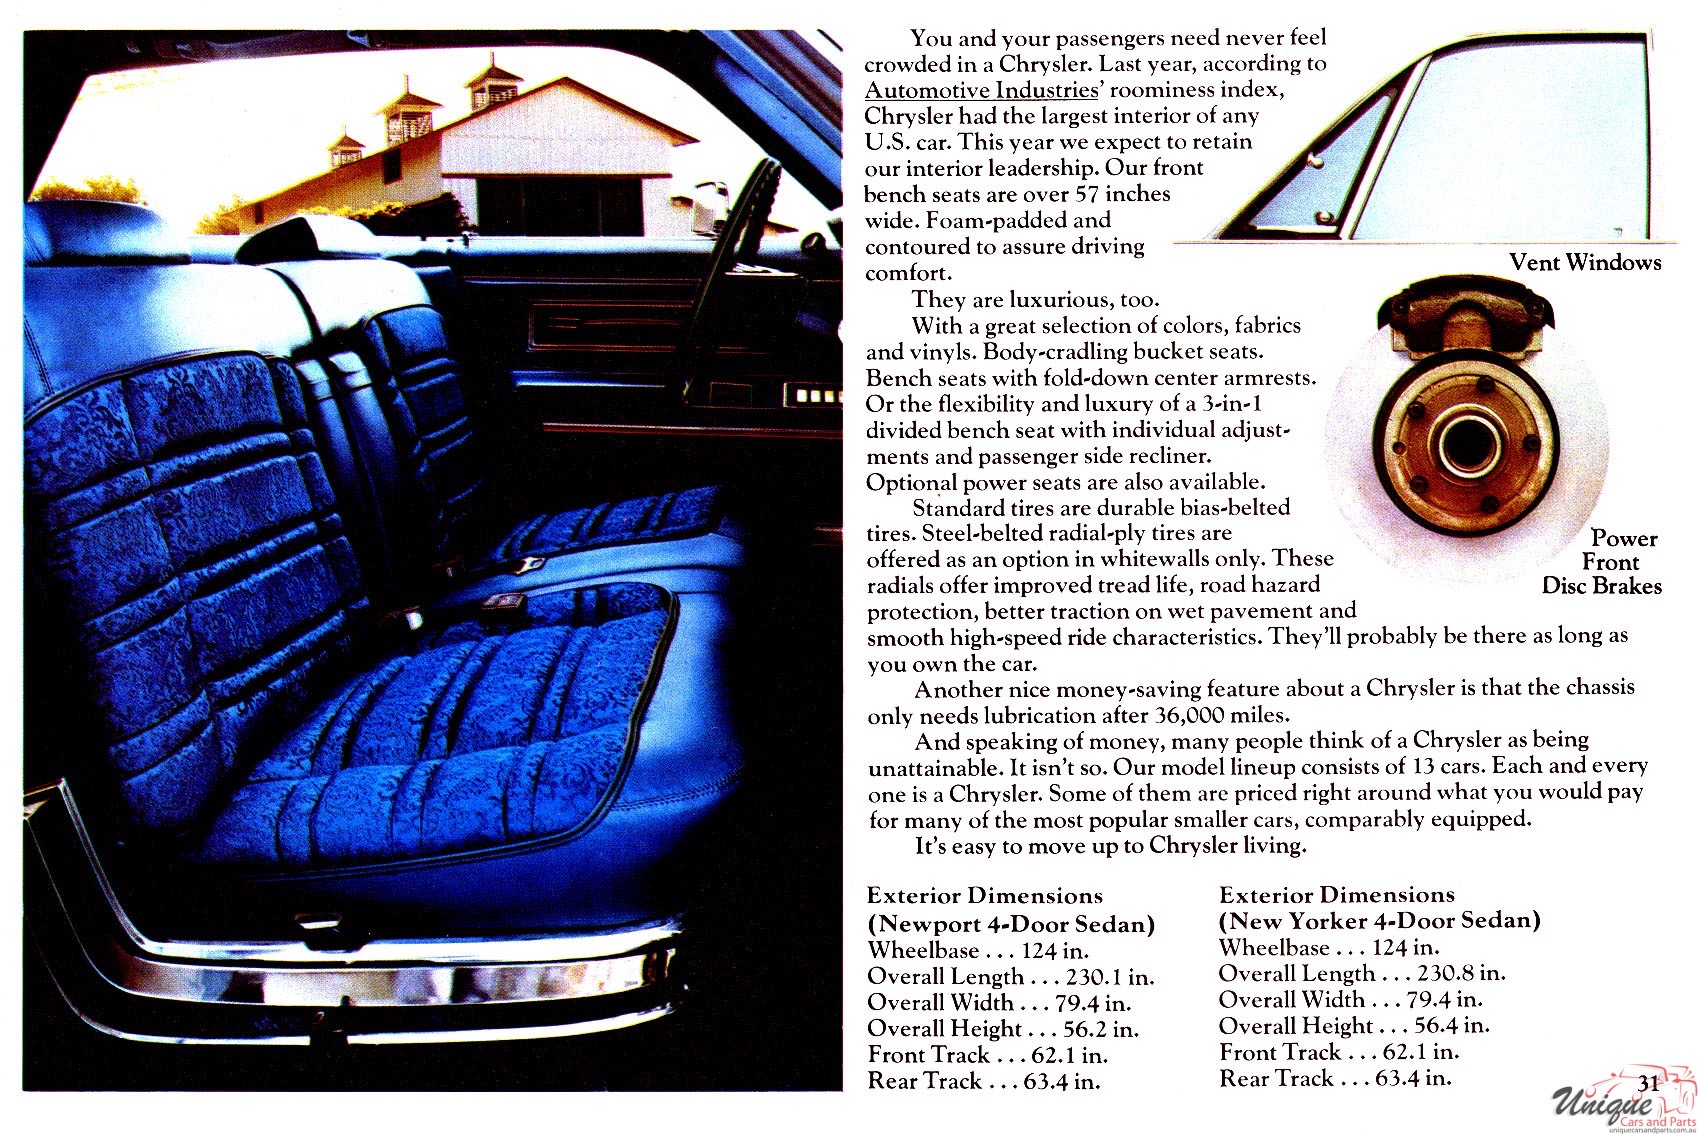 1973 Chrysler-Plymouth Brochure Page 4